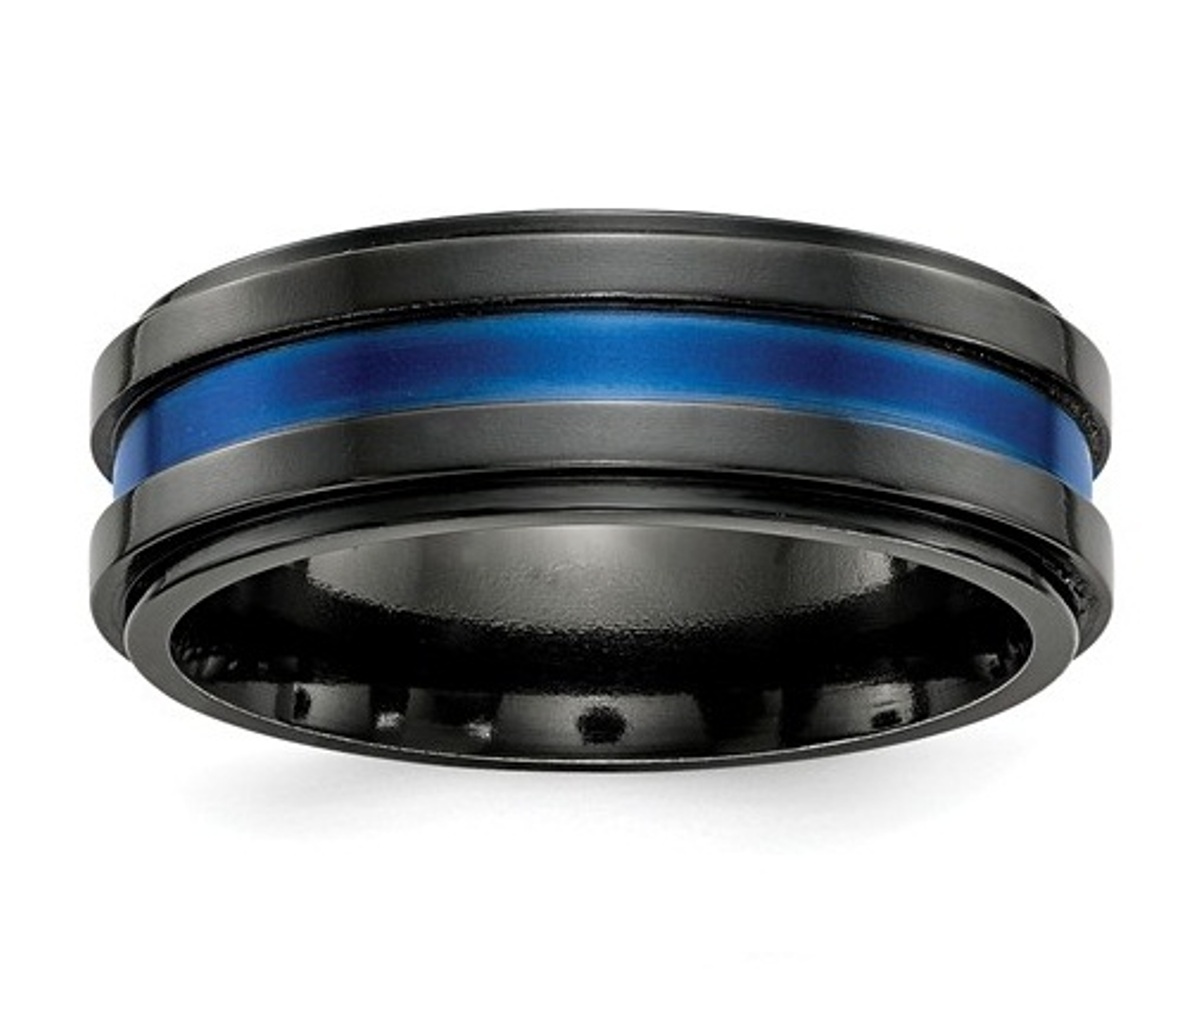  Black Ti Grooved Blue Anodized 7.5mm Band